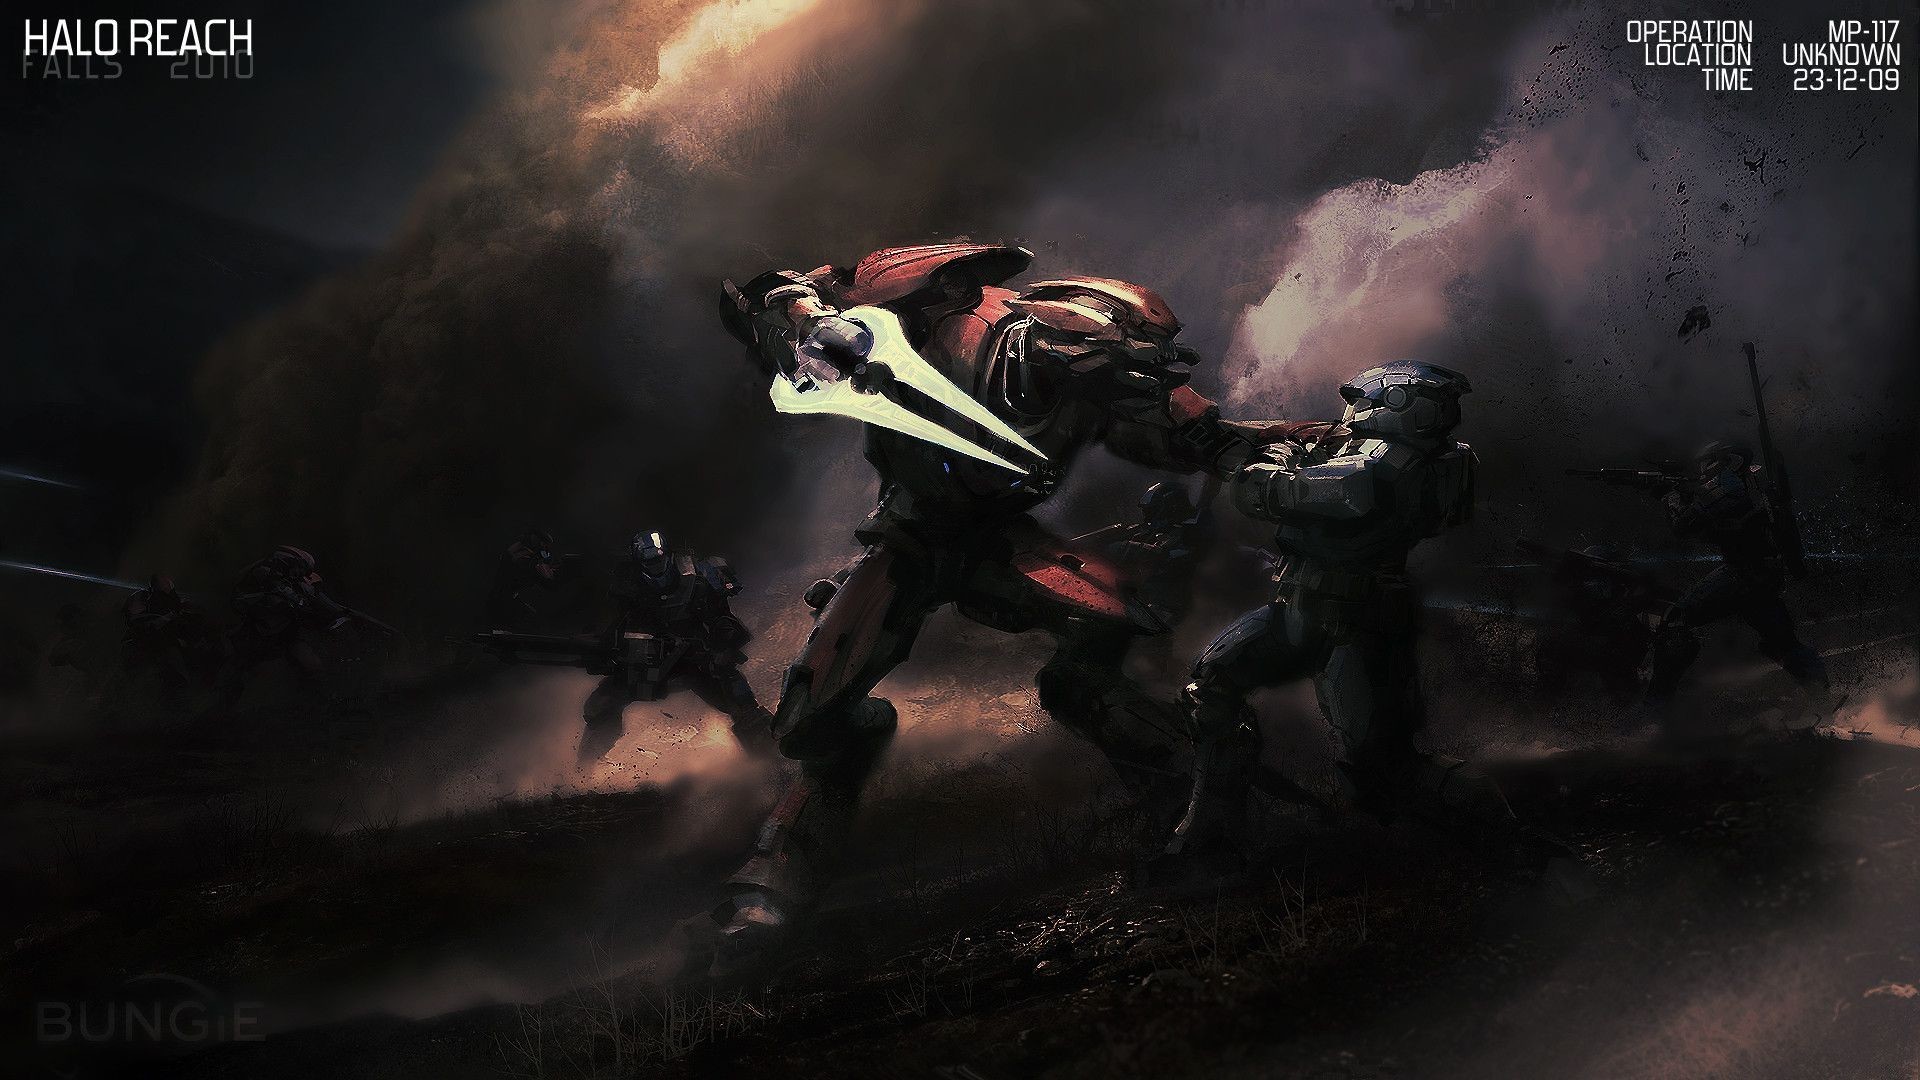 Halo Reach Wallpapers 1080p – Wallpaper Cave